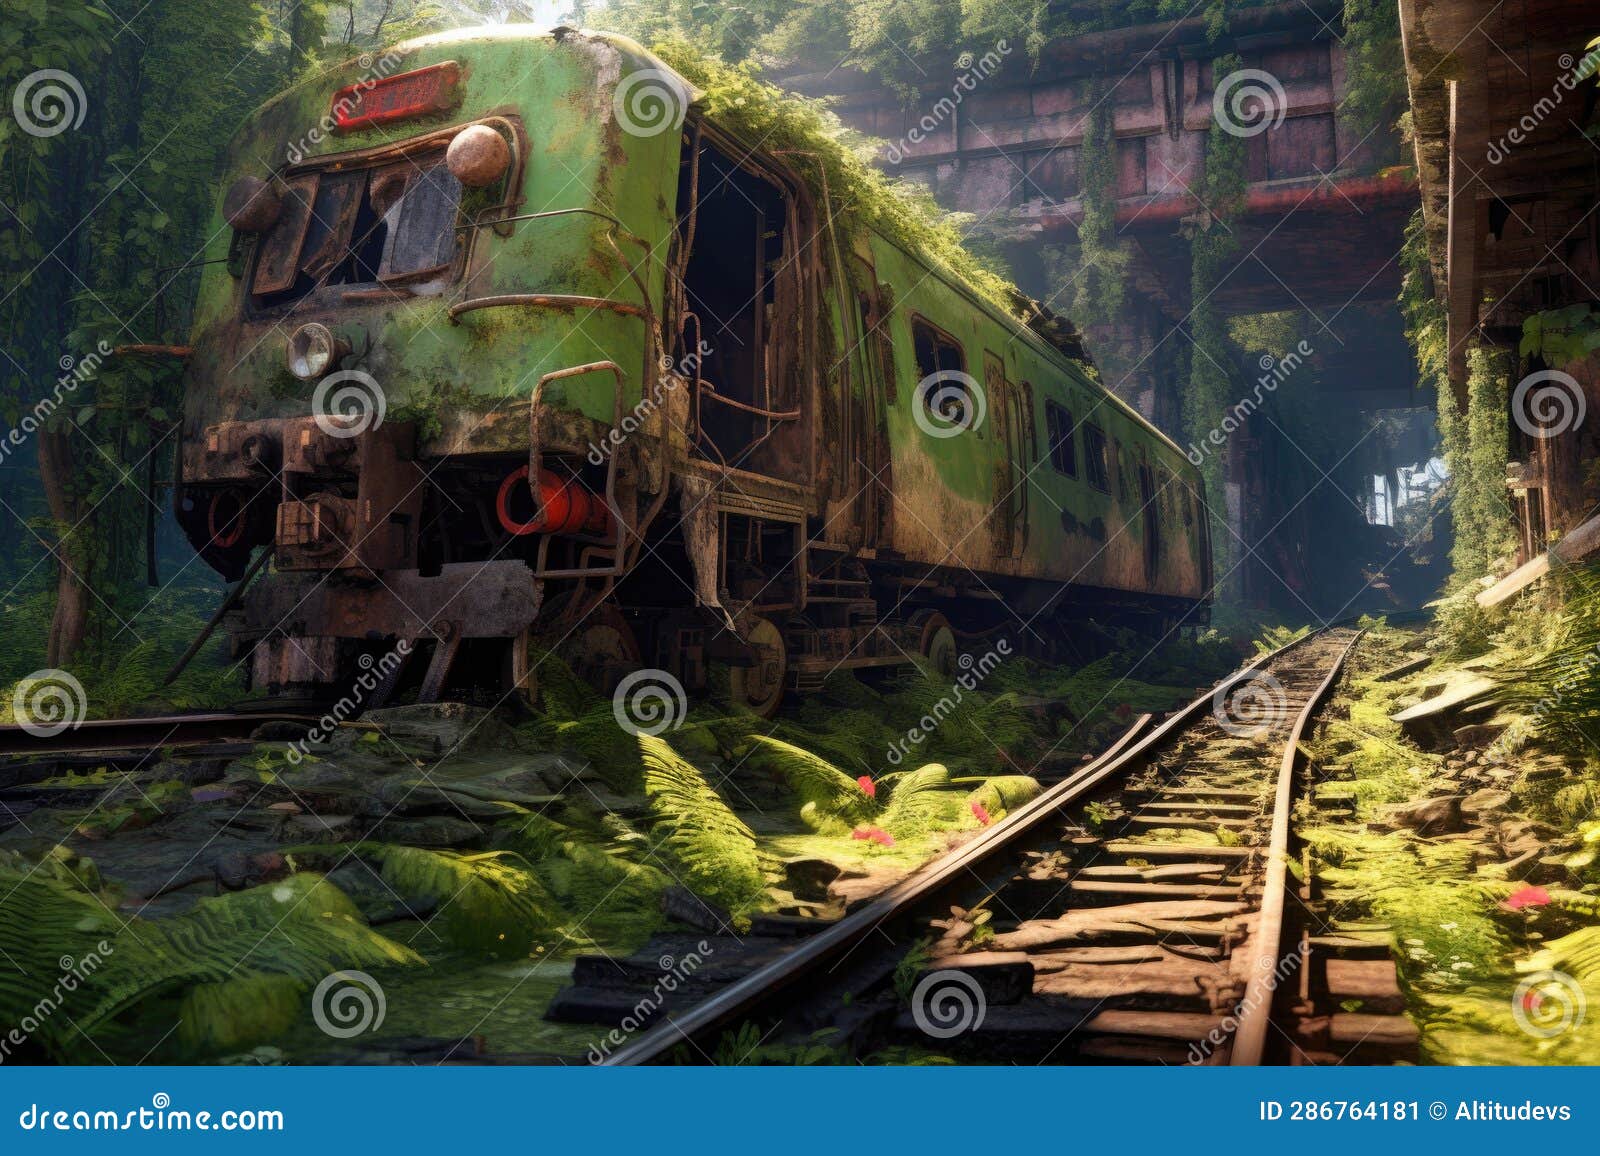 derailed train car with nature reclaiming the area